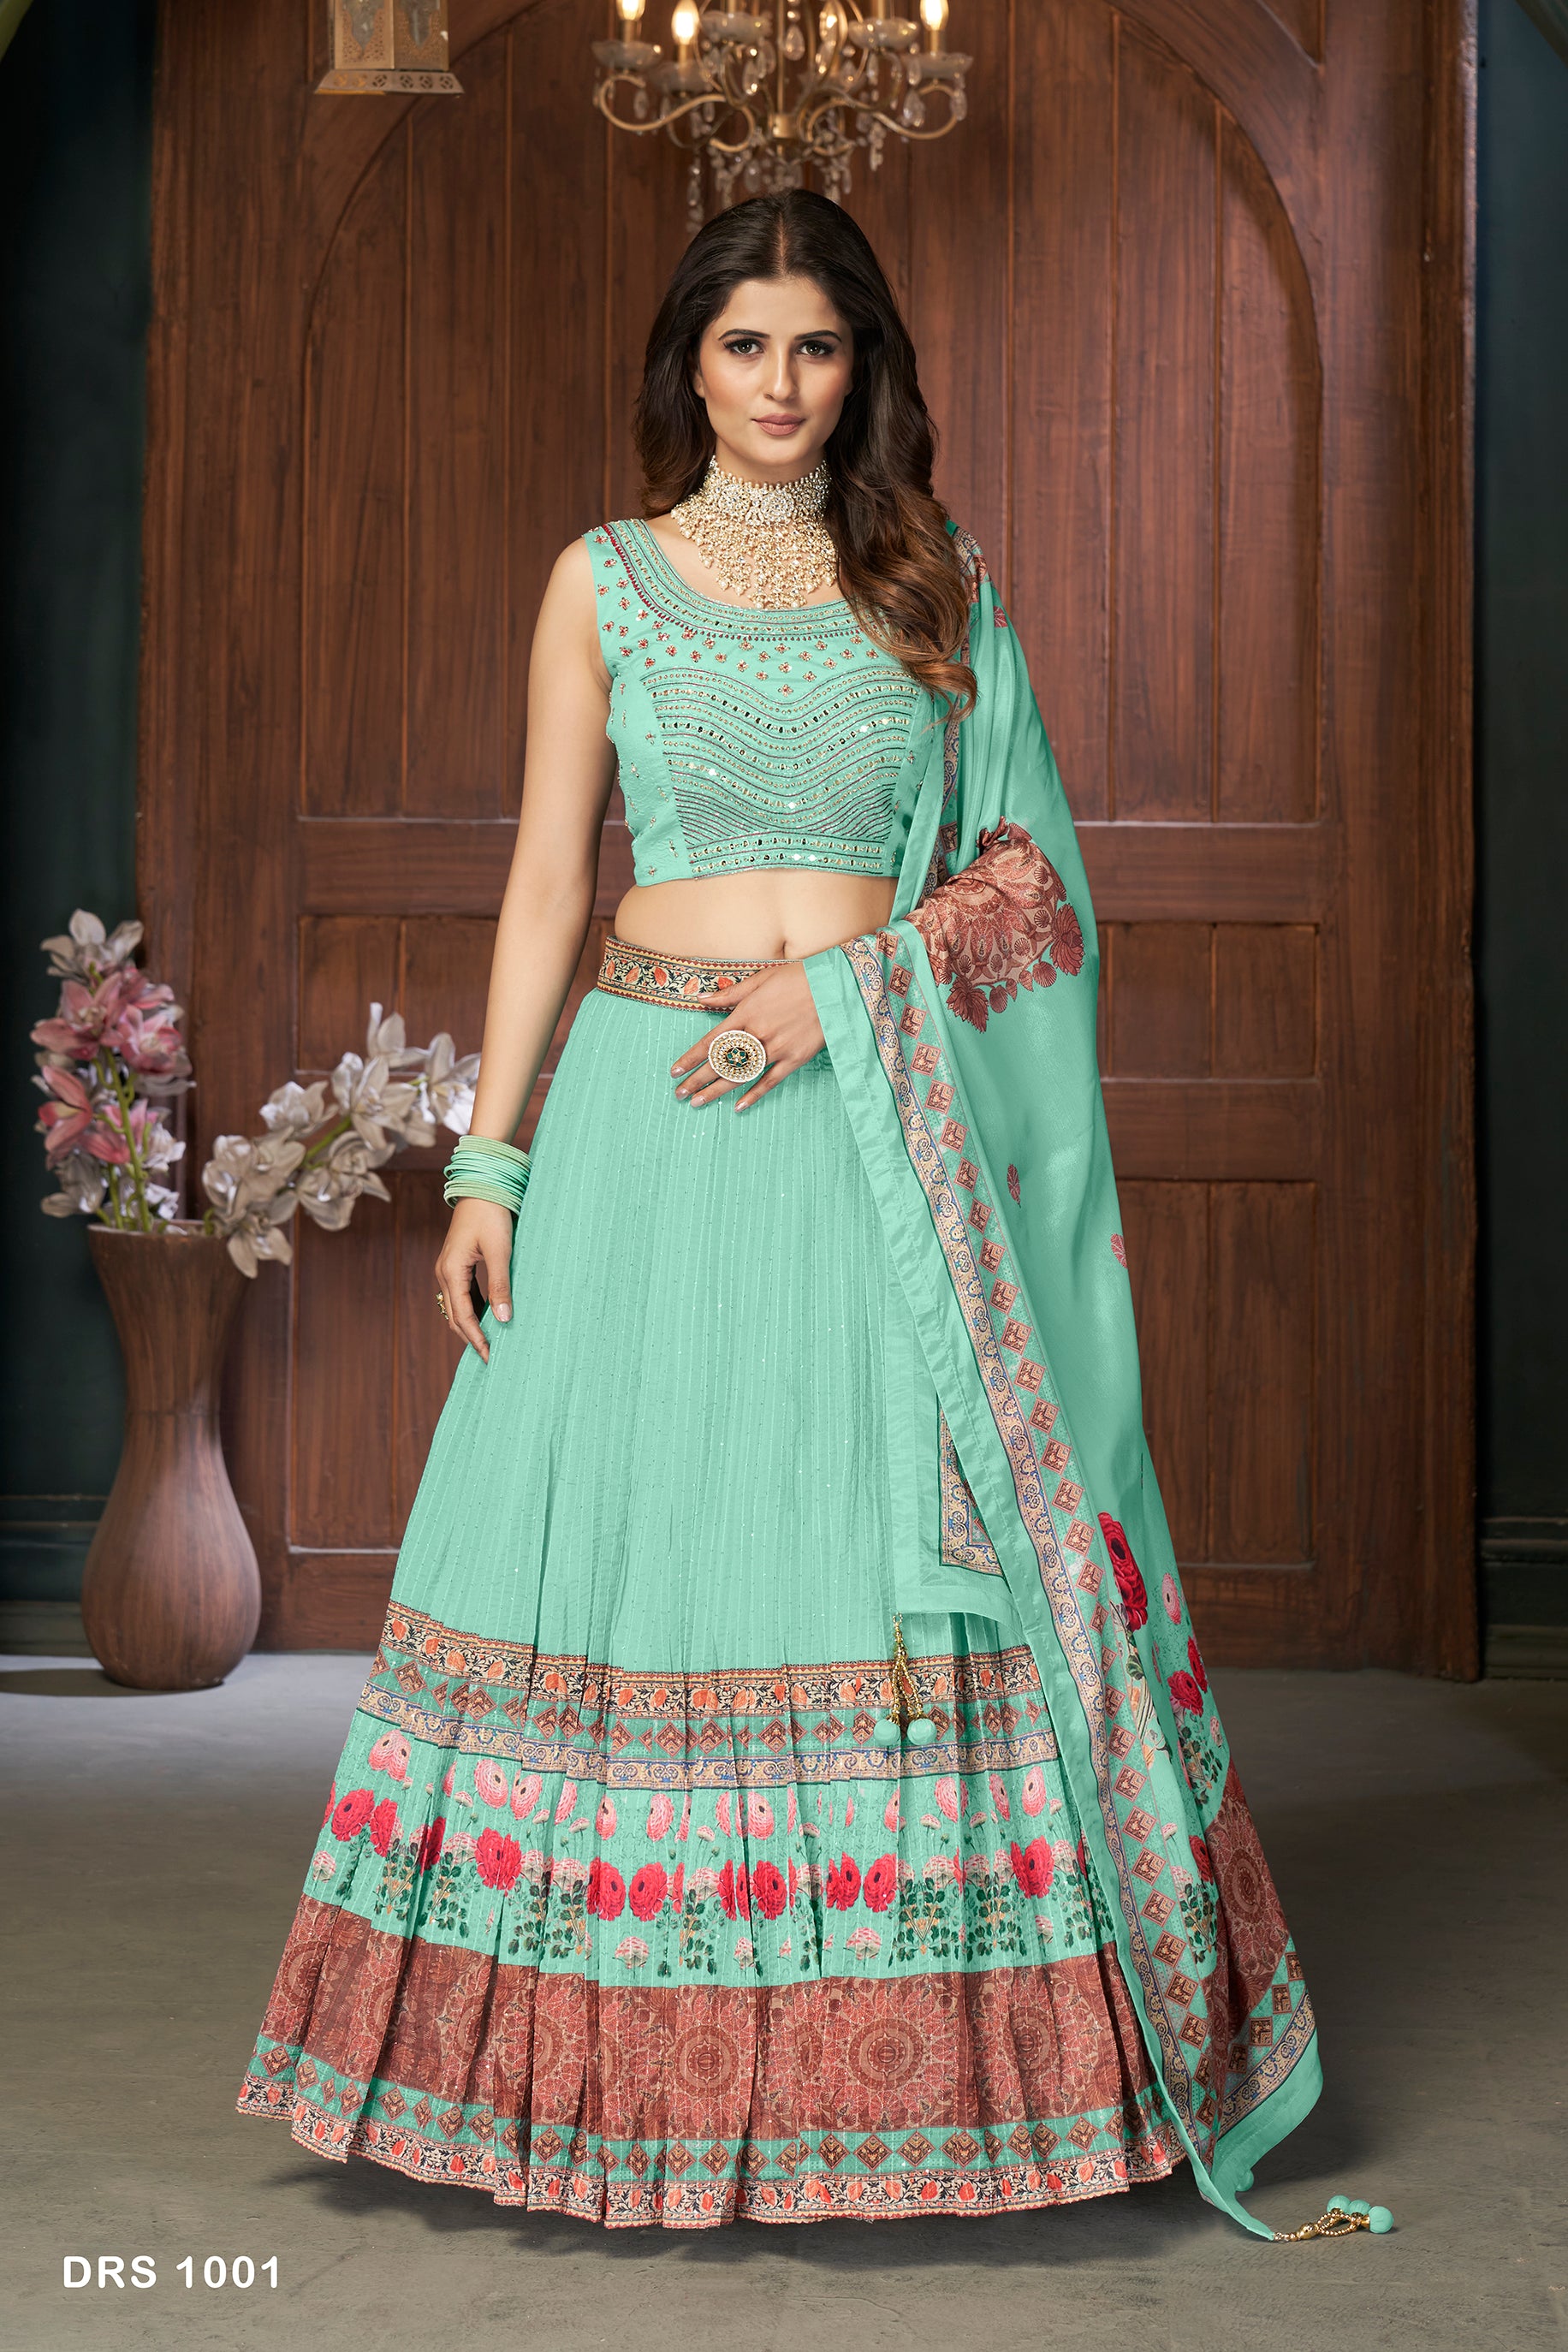 Lehenga Choli in Blue Color with Silk and Embroidery Work